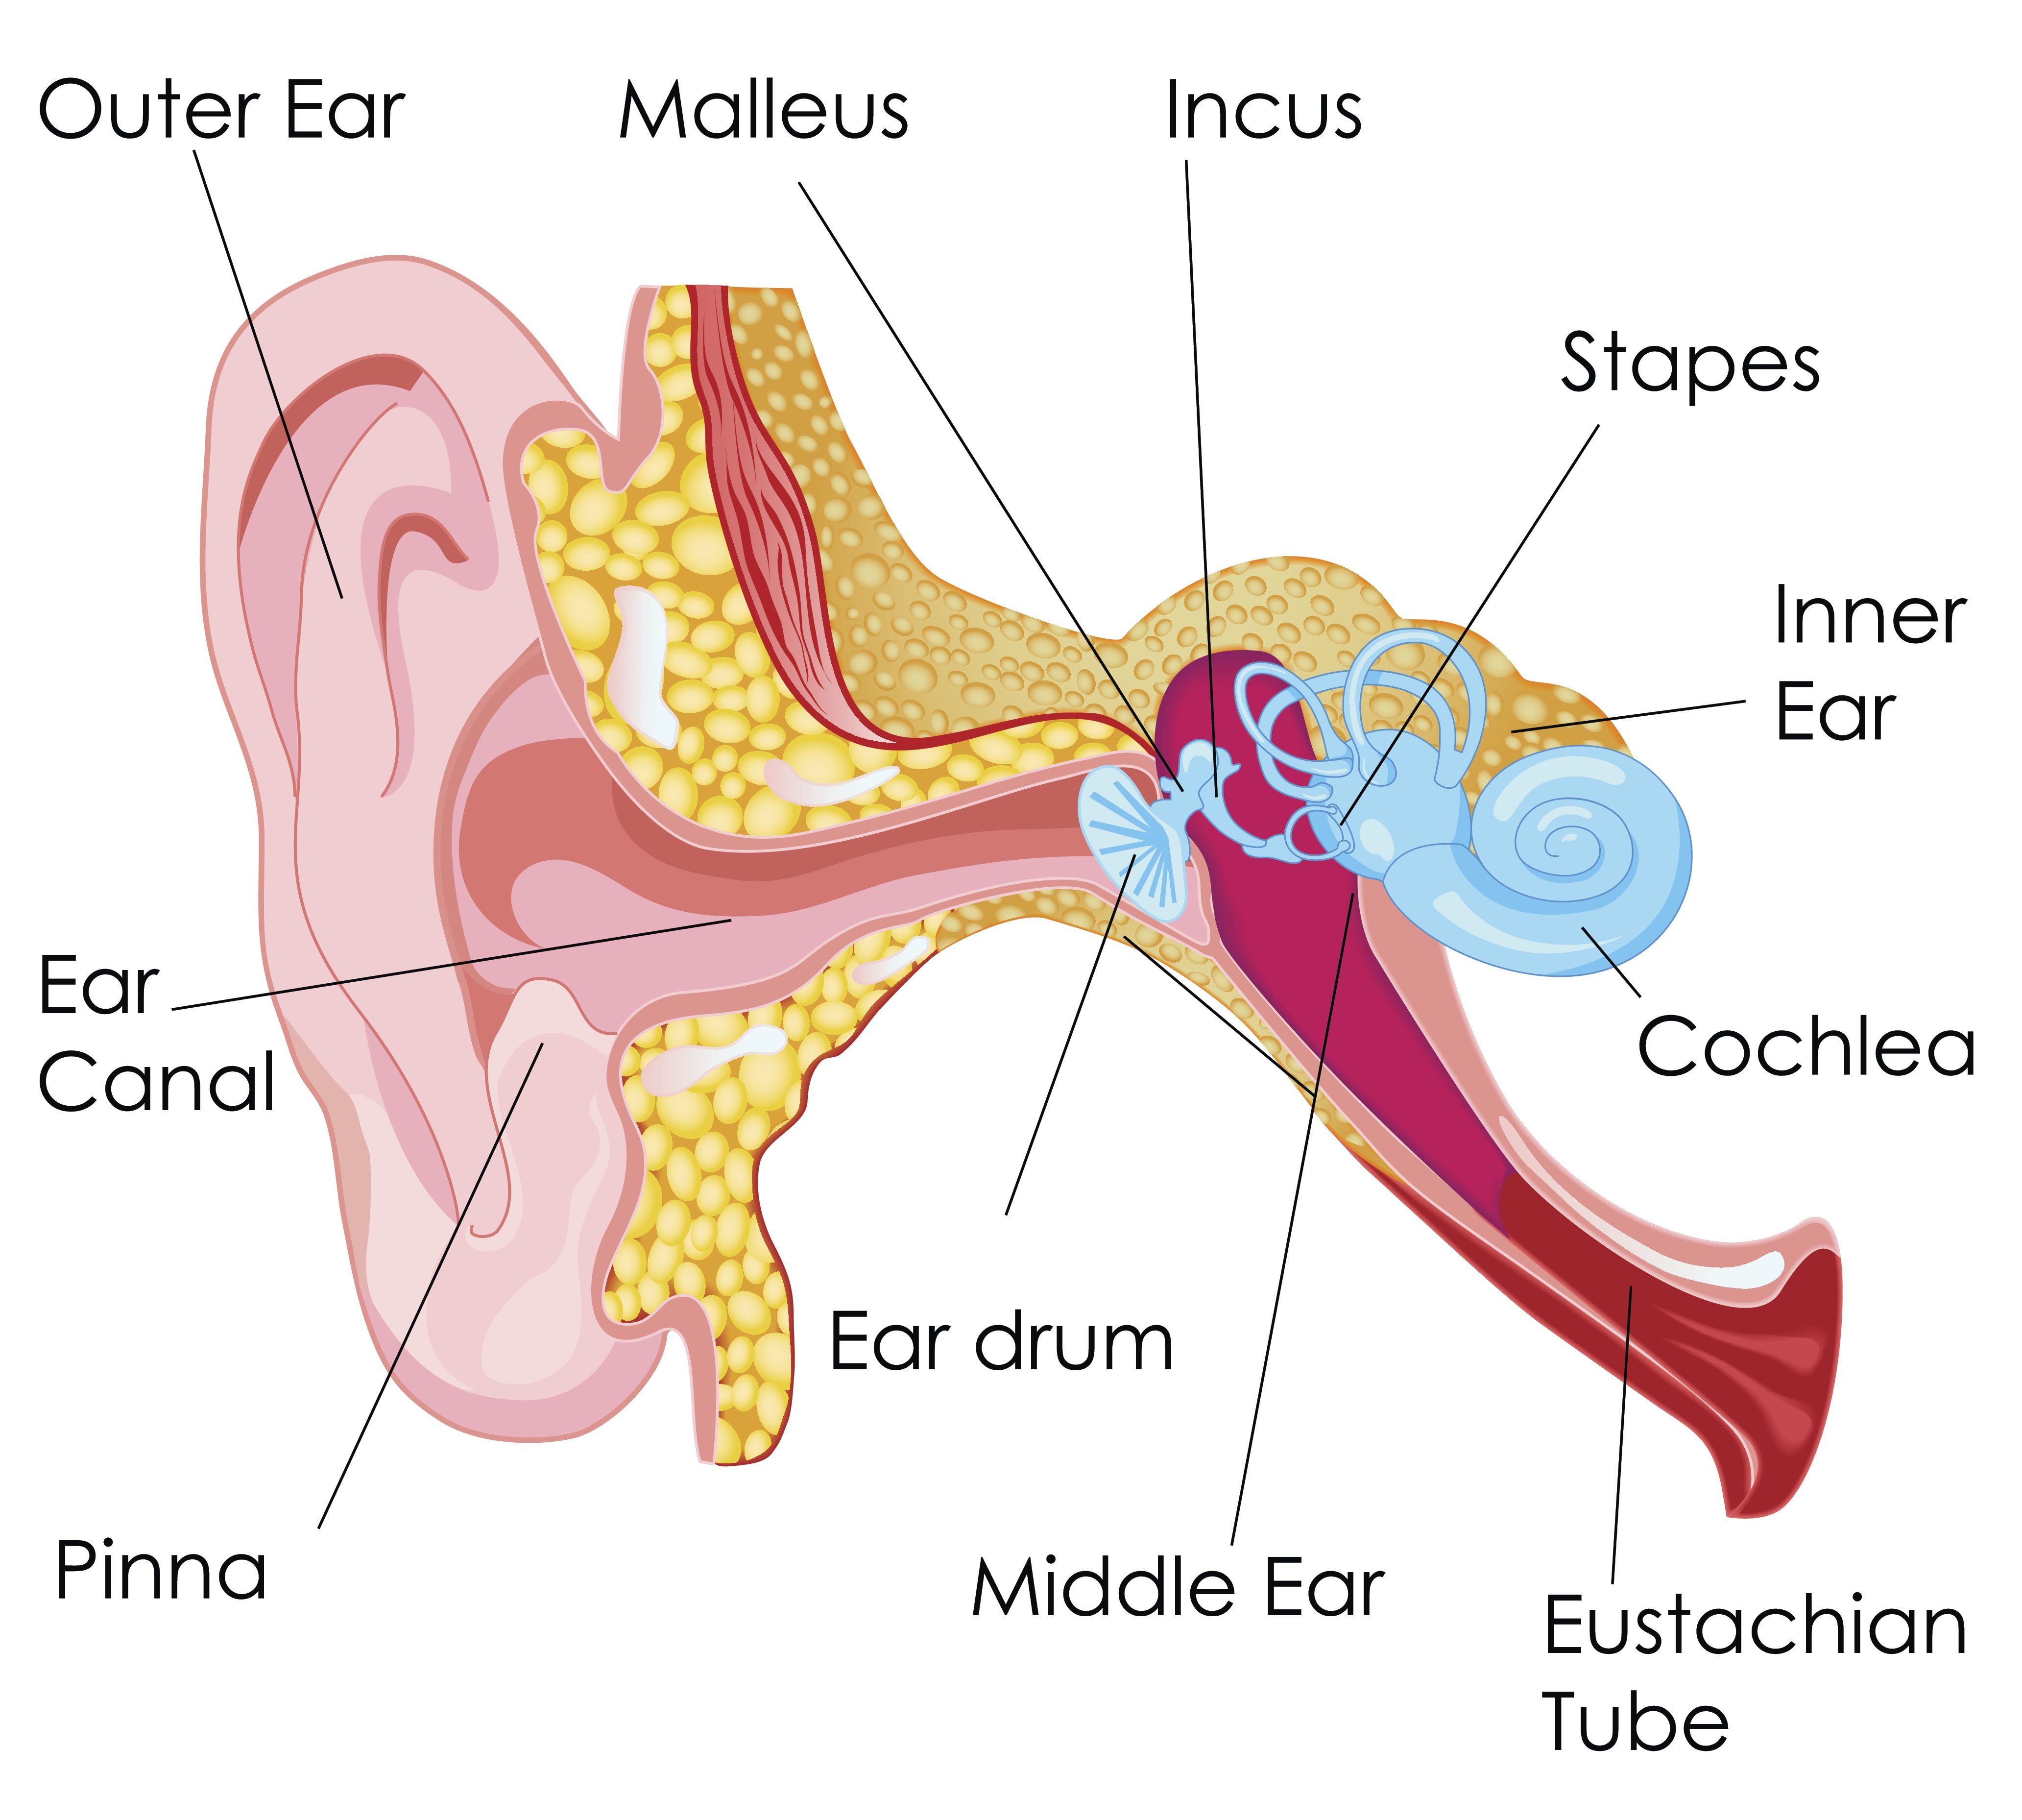 ear anatomy canal diagram hearing inner human pressure balance outer relieve cleaning ears tips tube loss parent patient education dizziness